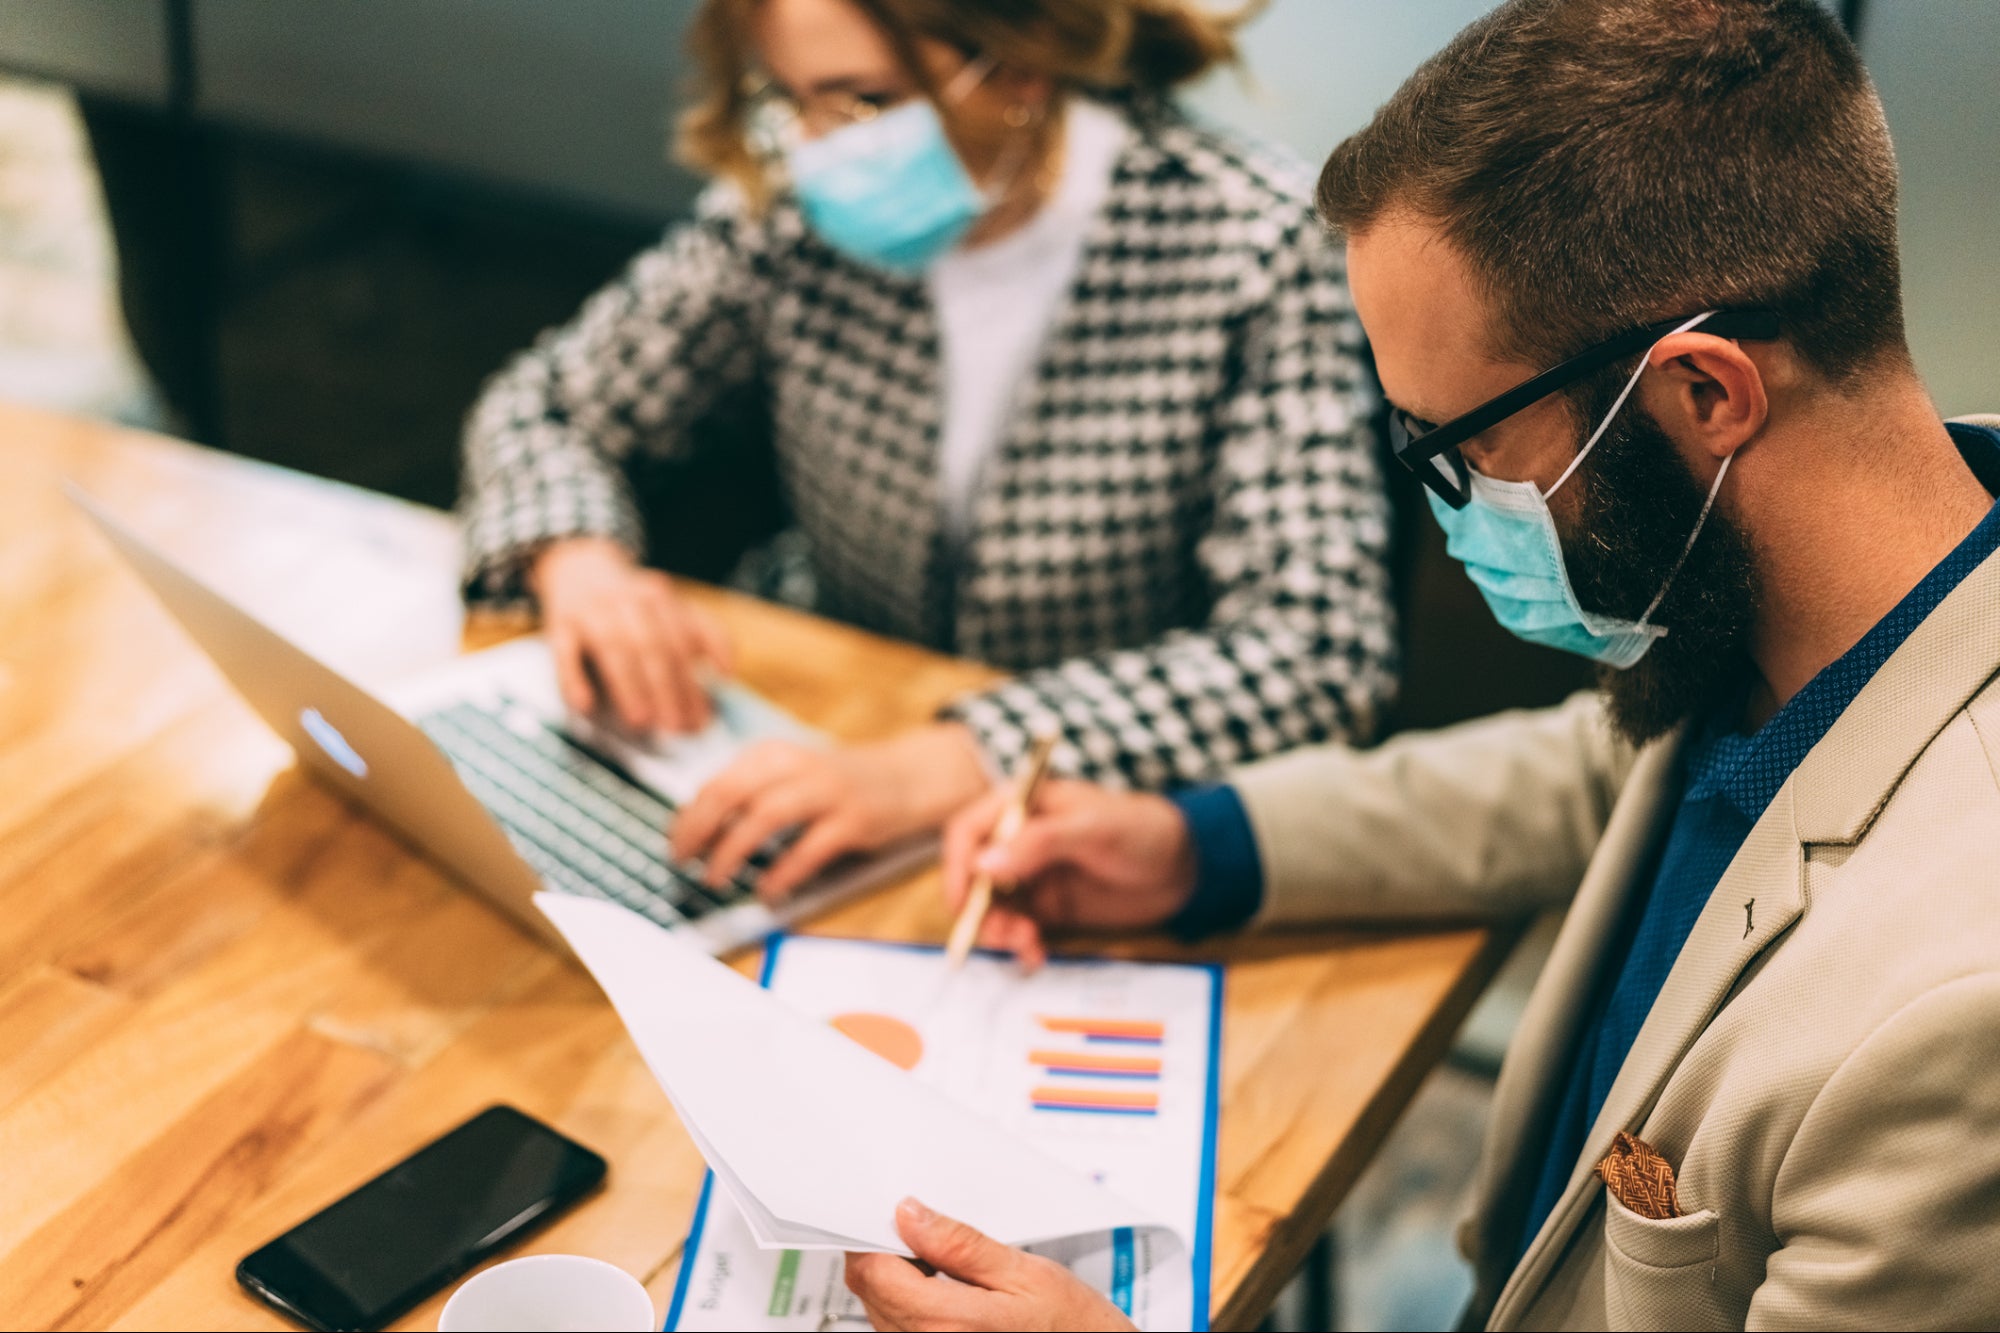 4 Tips for Discovering a Great Business Idea During the Pandemic